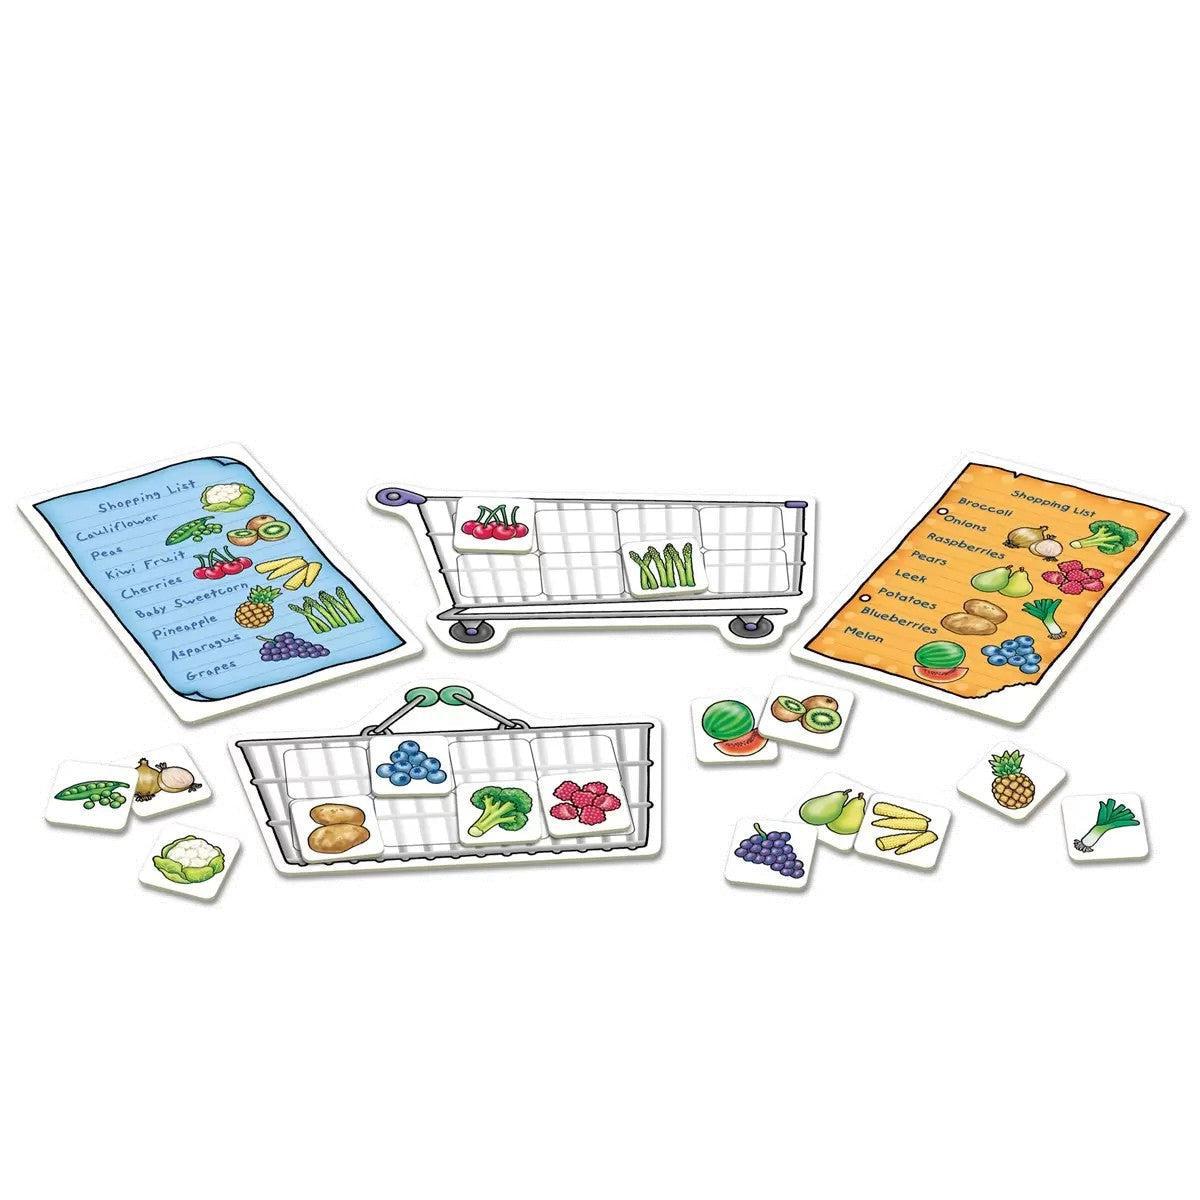 Orchard Toys Shopping List Extras - Fruit and Veg